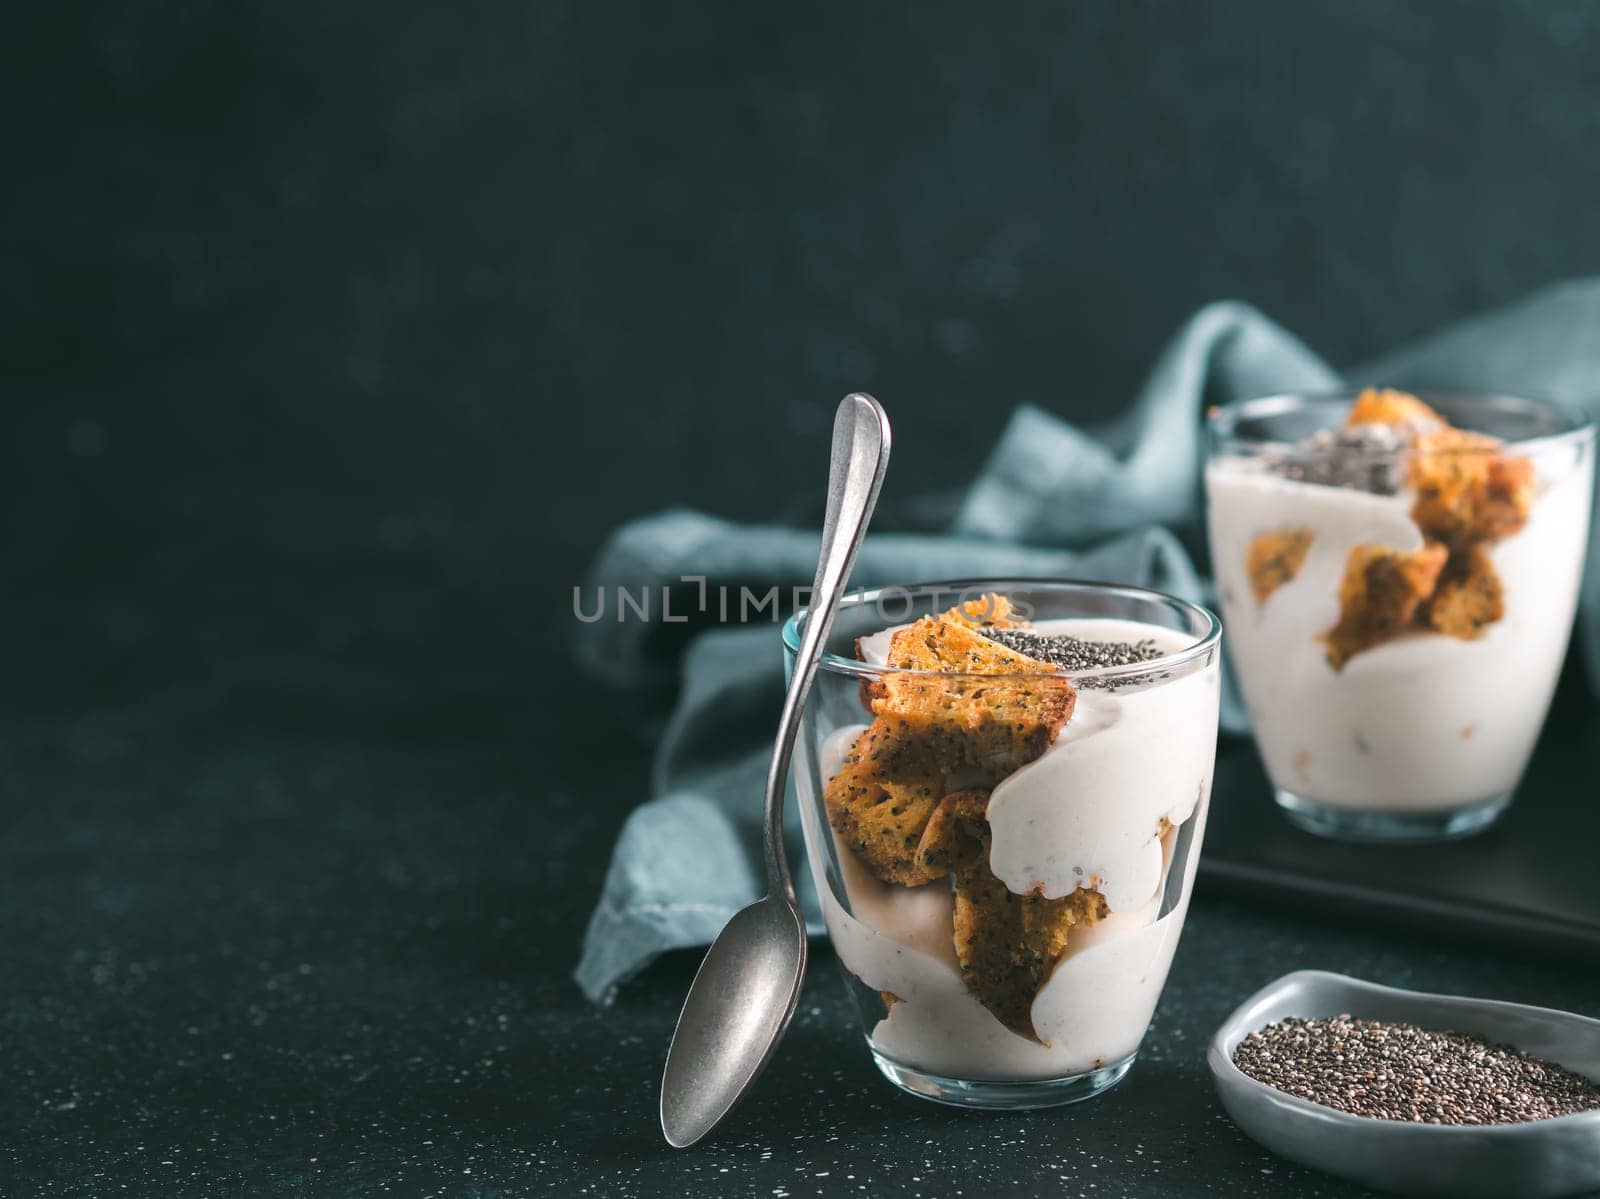 No baked cheesecake dessert with crushed carrots biscuits and chia seeds in glass jar on dark background. Ideas and recipes for healthy breakfast. Copy space for text.